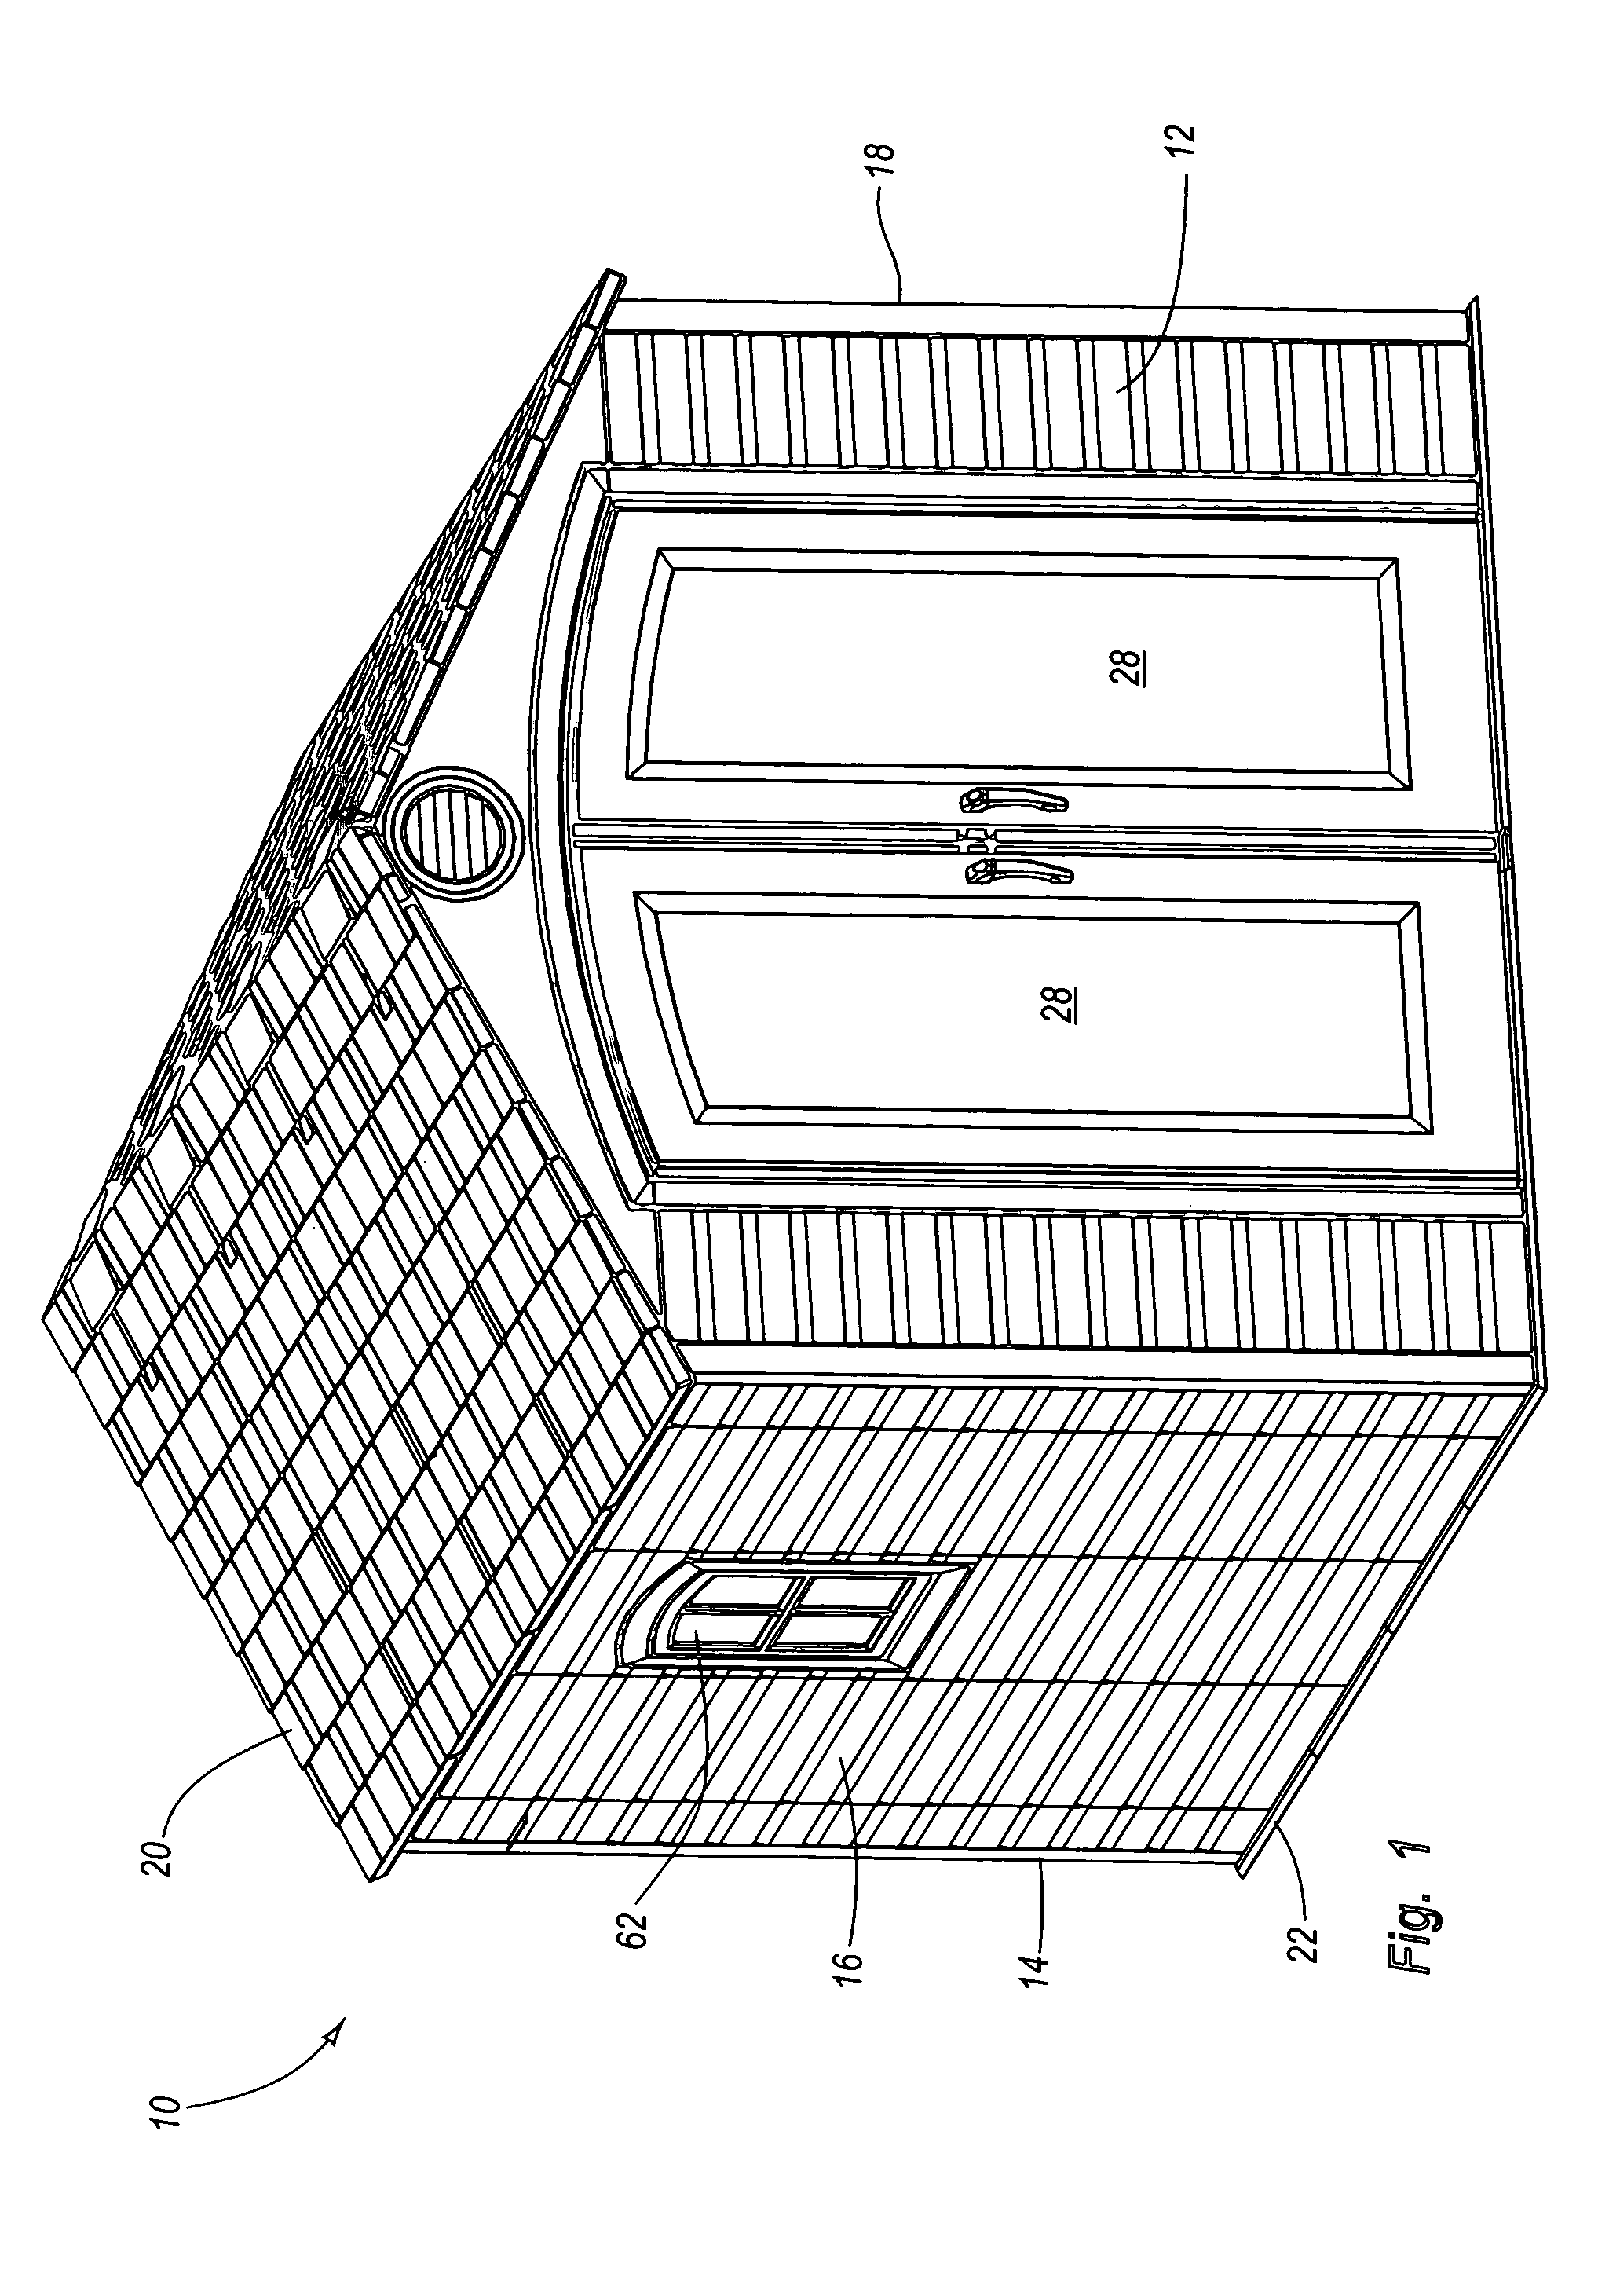 System and method for constructing a modular enclosure